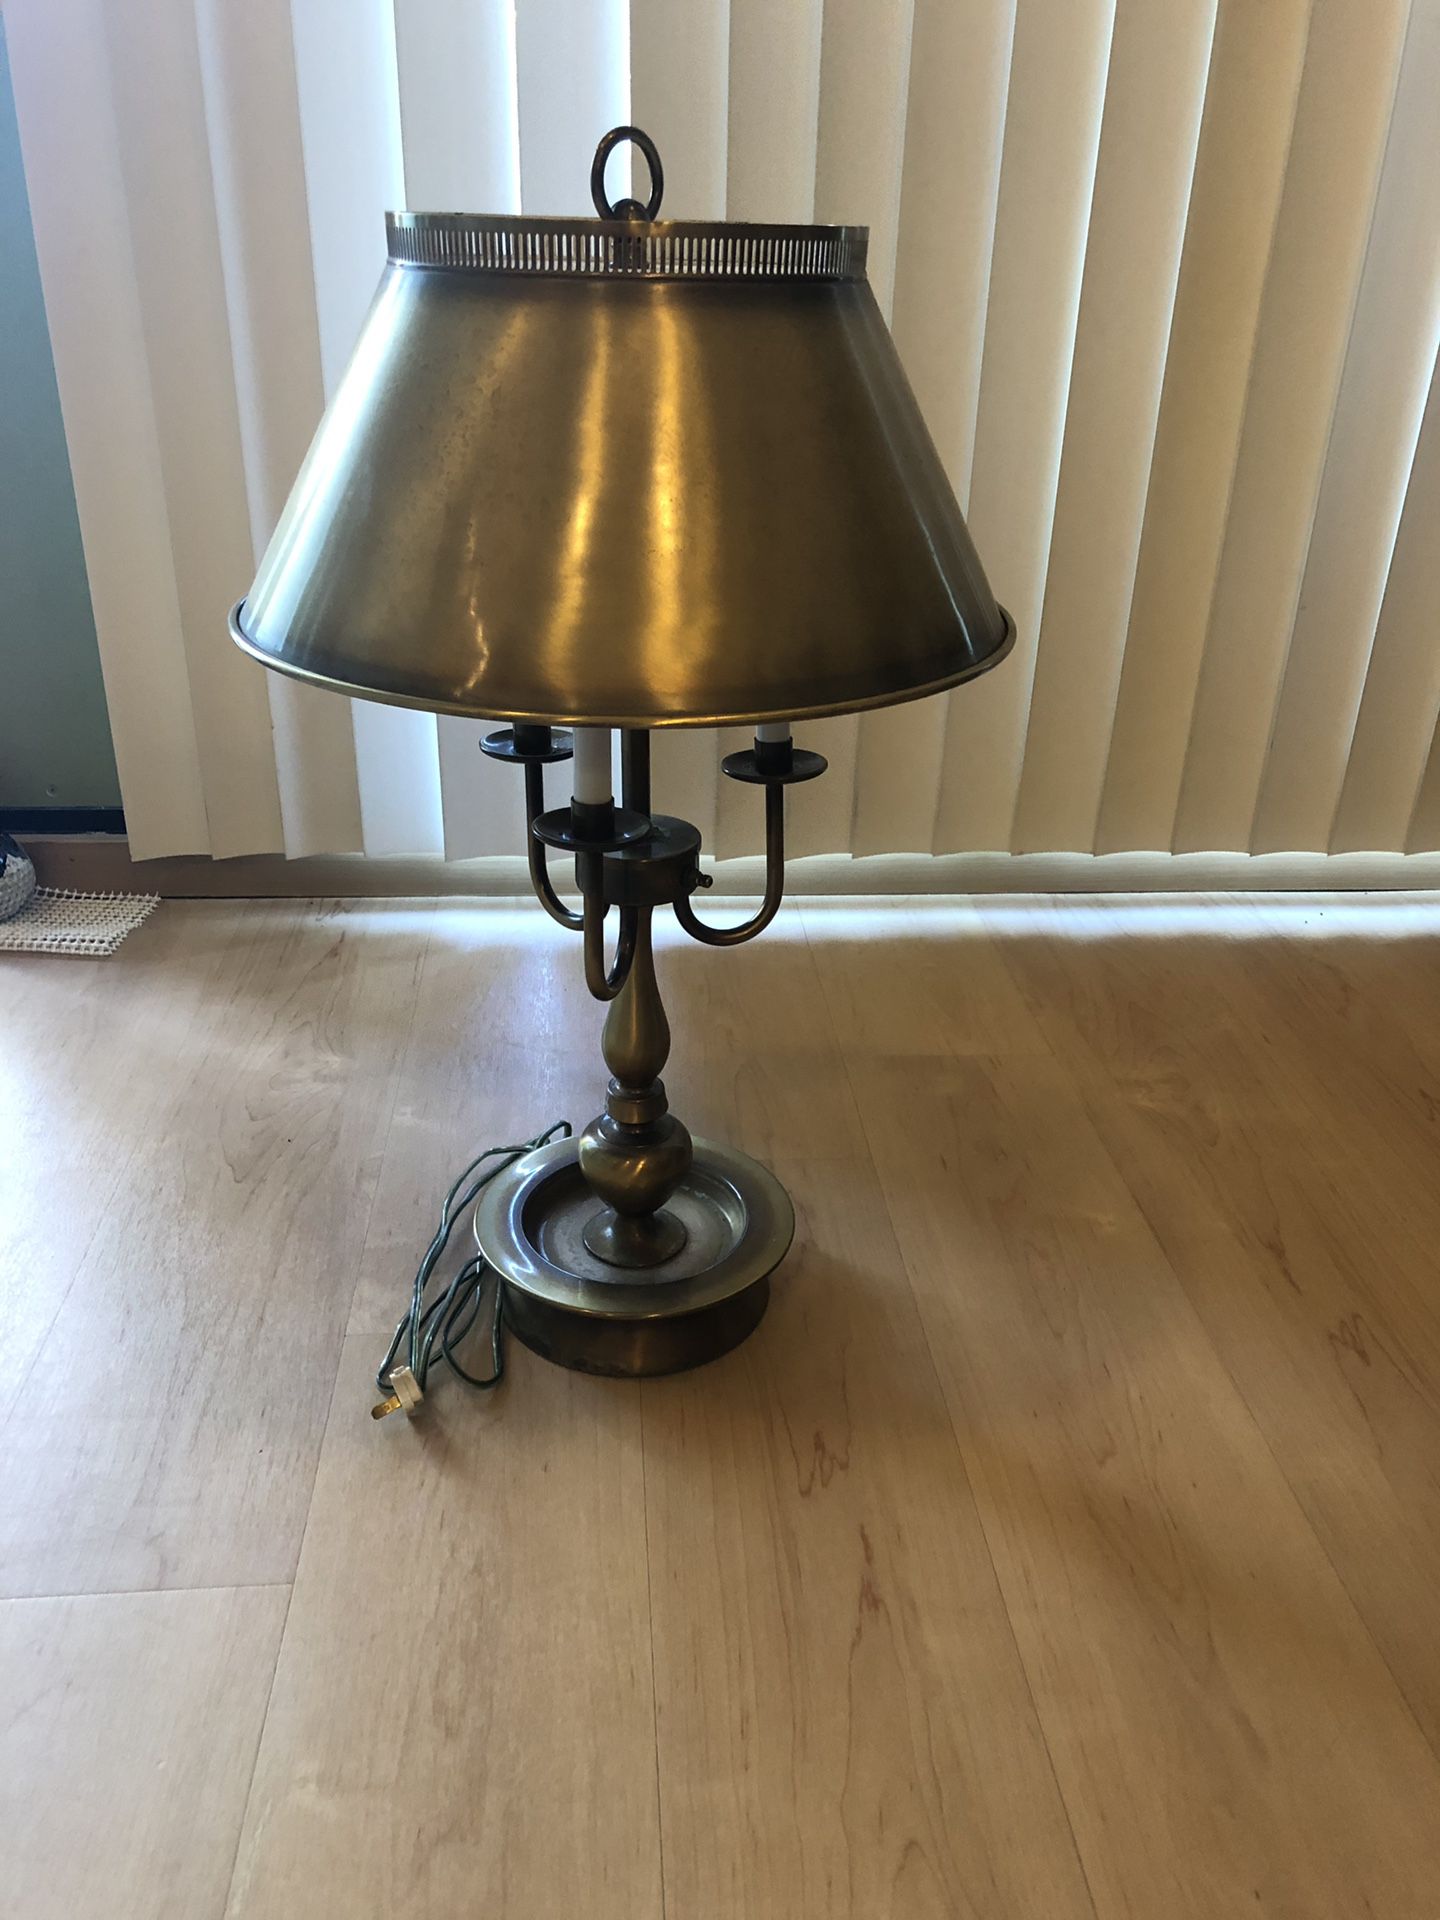 Brass lamp with attached brass shade